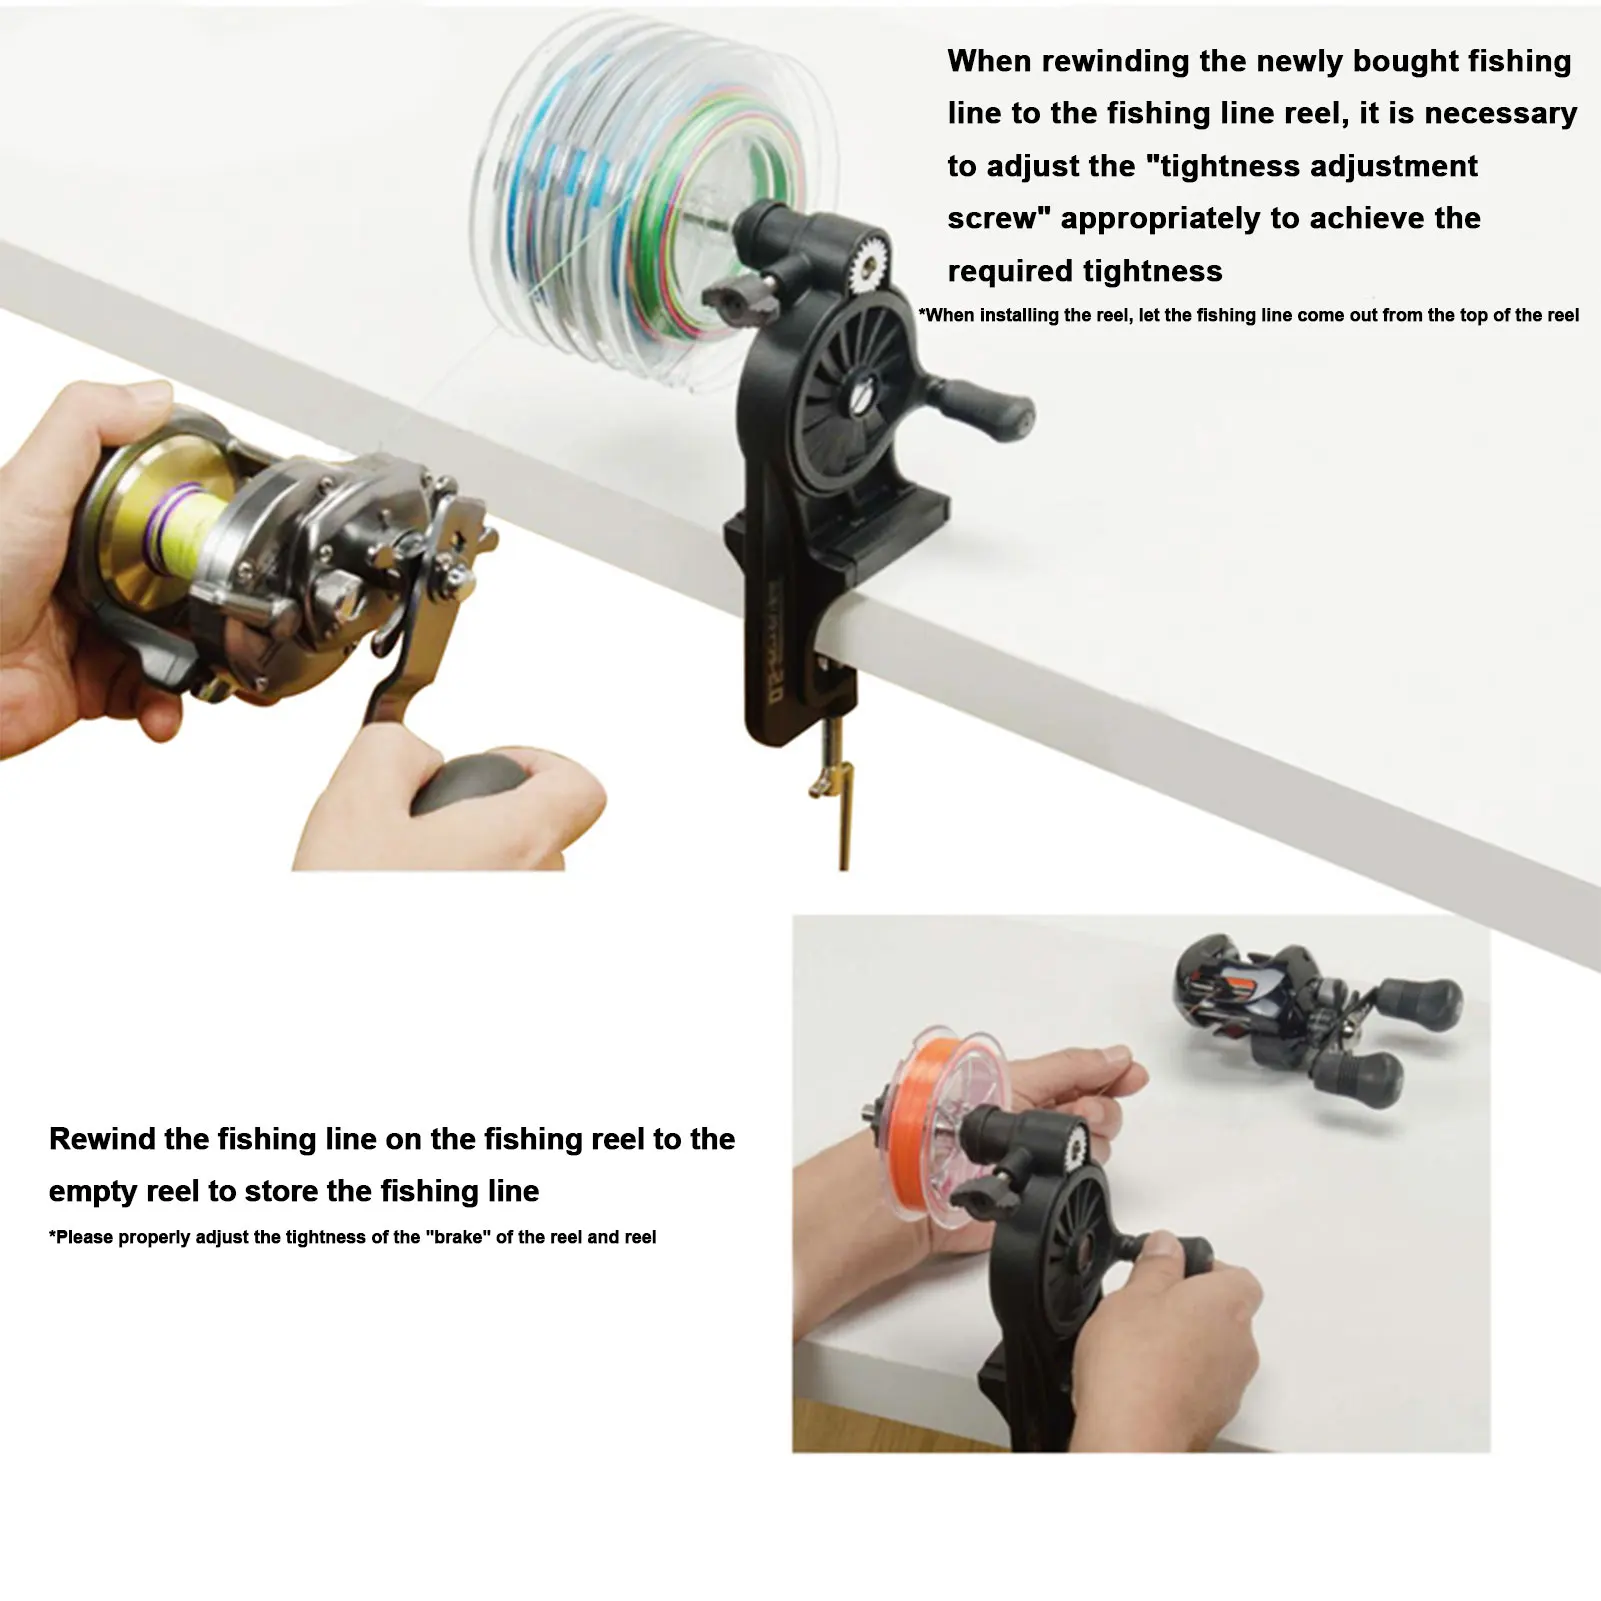 https://ae01.alicdn.com/kf/S17c7ffc4e2e14f9a8d3889f6559ee0b0A/Fishing-Line-Spooler-Portable-Table-Clamp-Fishing-Line-Winder-Adjustable-Fishing-Reel-Line-Spooler-Machine-For.jpg